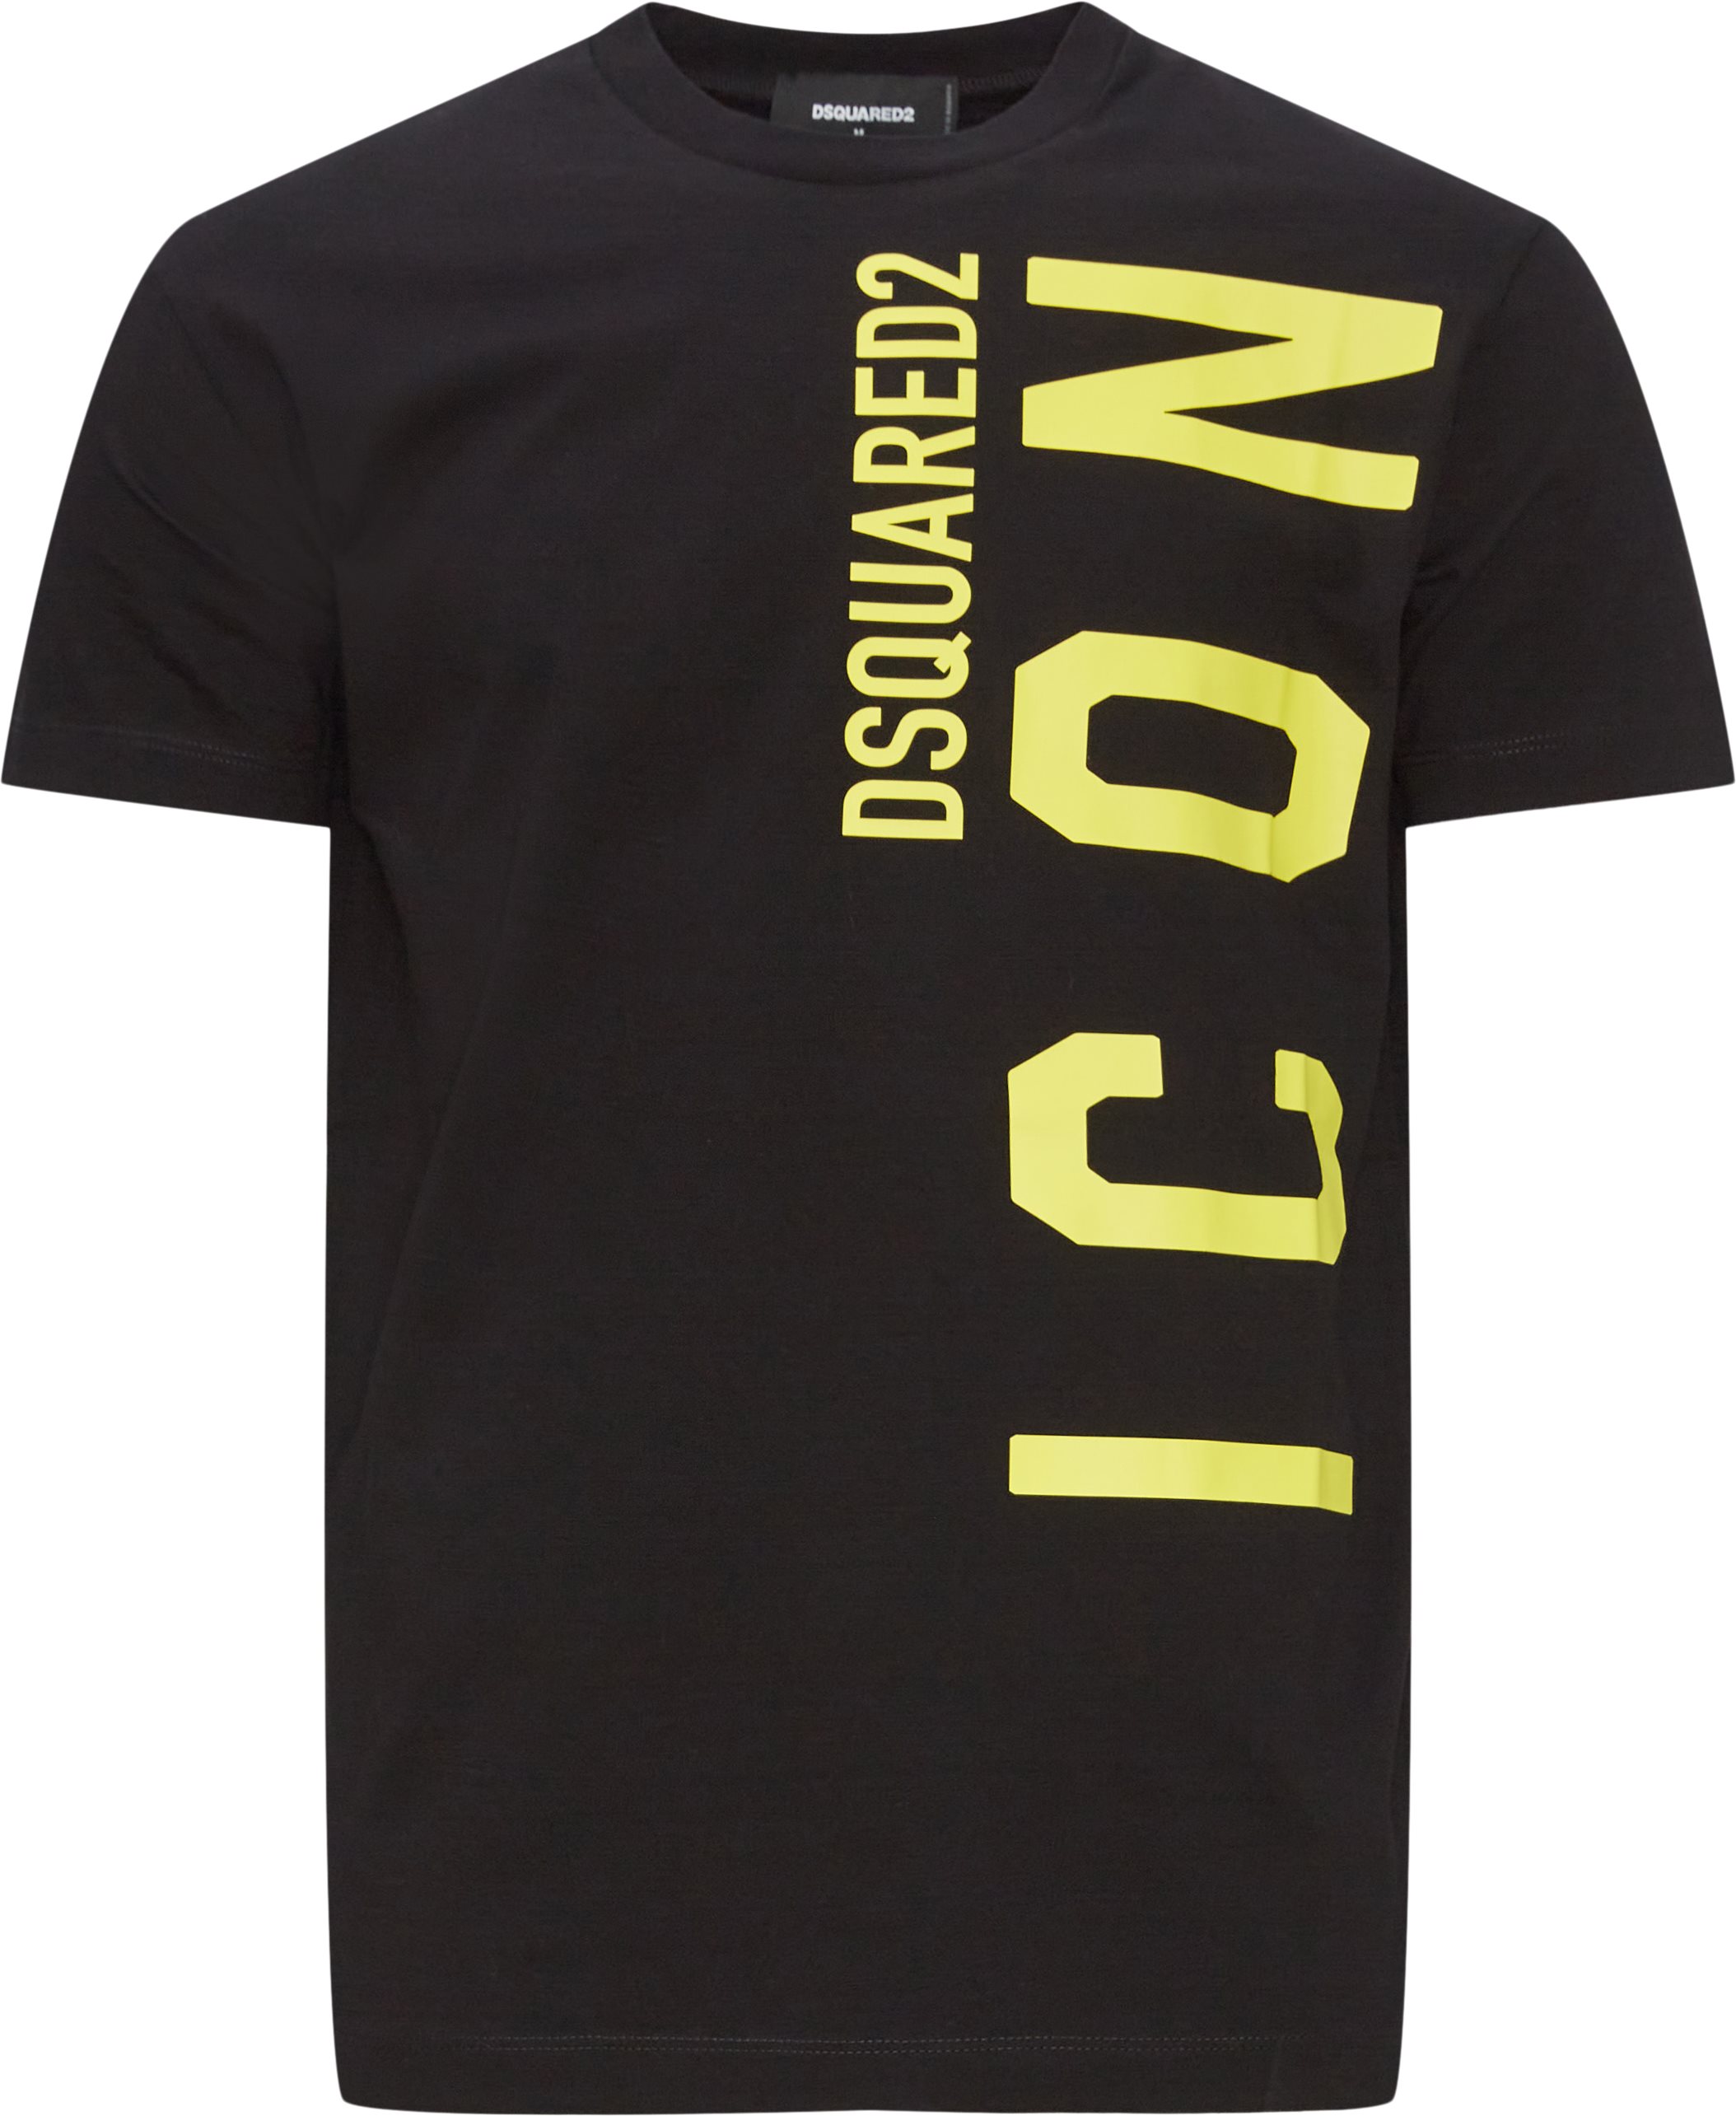 Dsquared2 T-shirts S79GC0060 S23009 Sort